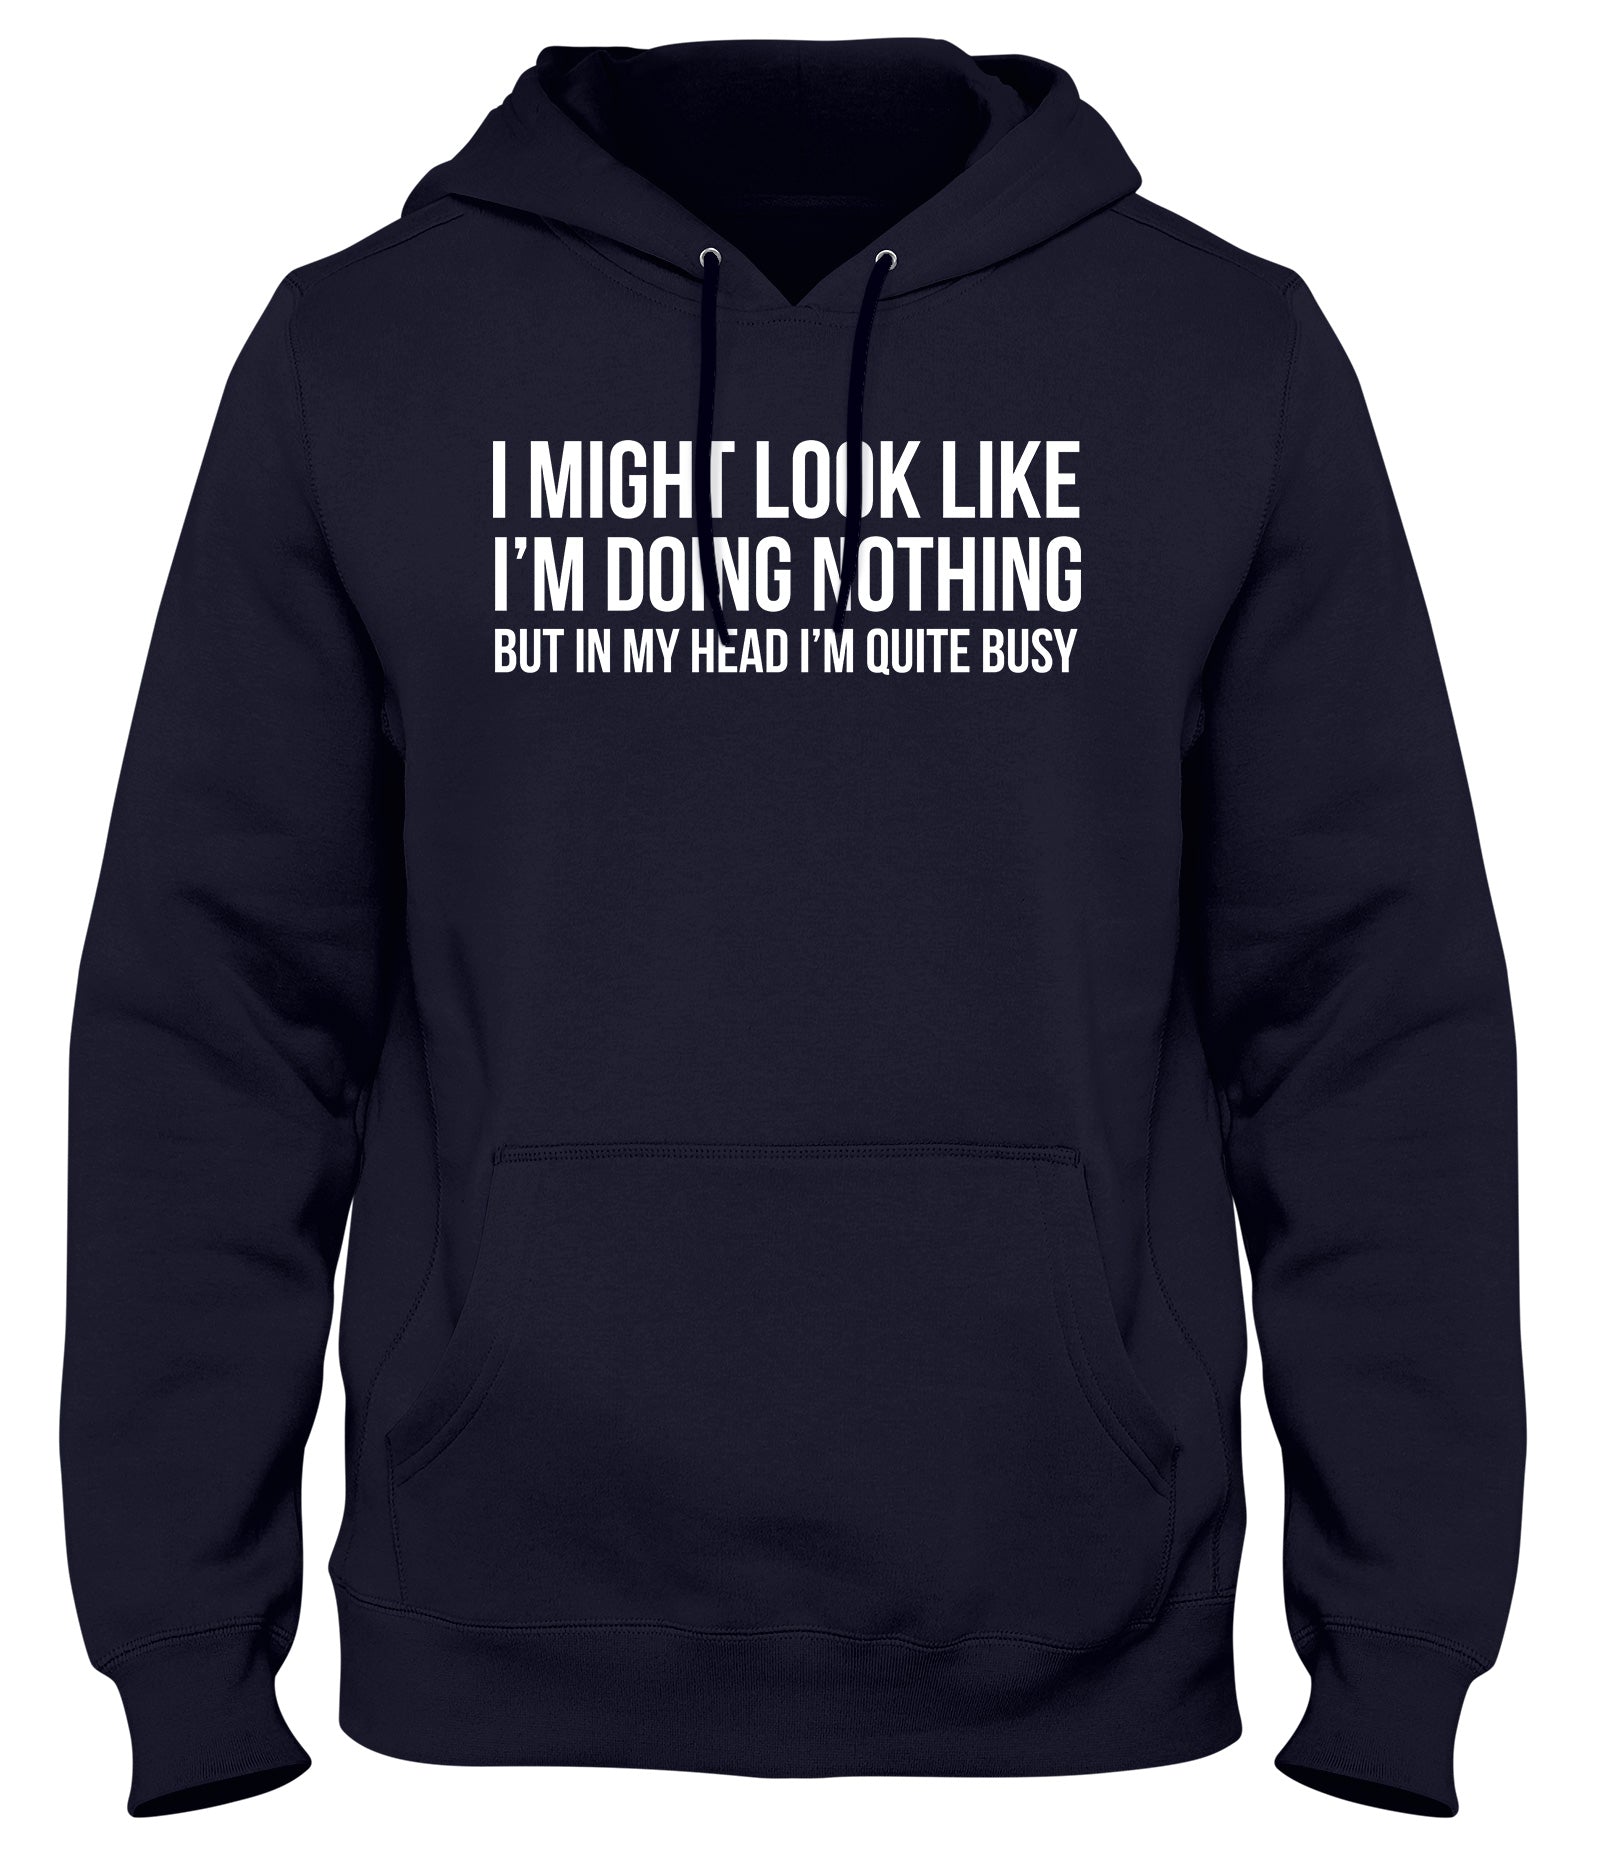 I MIGHT LOOK LIKE I'M DOING NOTHING BUT IN MY HEAD I'M QUITE BUSY MENS WOMENS LADIES UNISEX FUNNY SLOGAN HOODIE